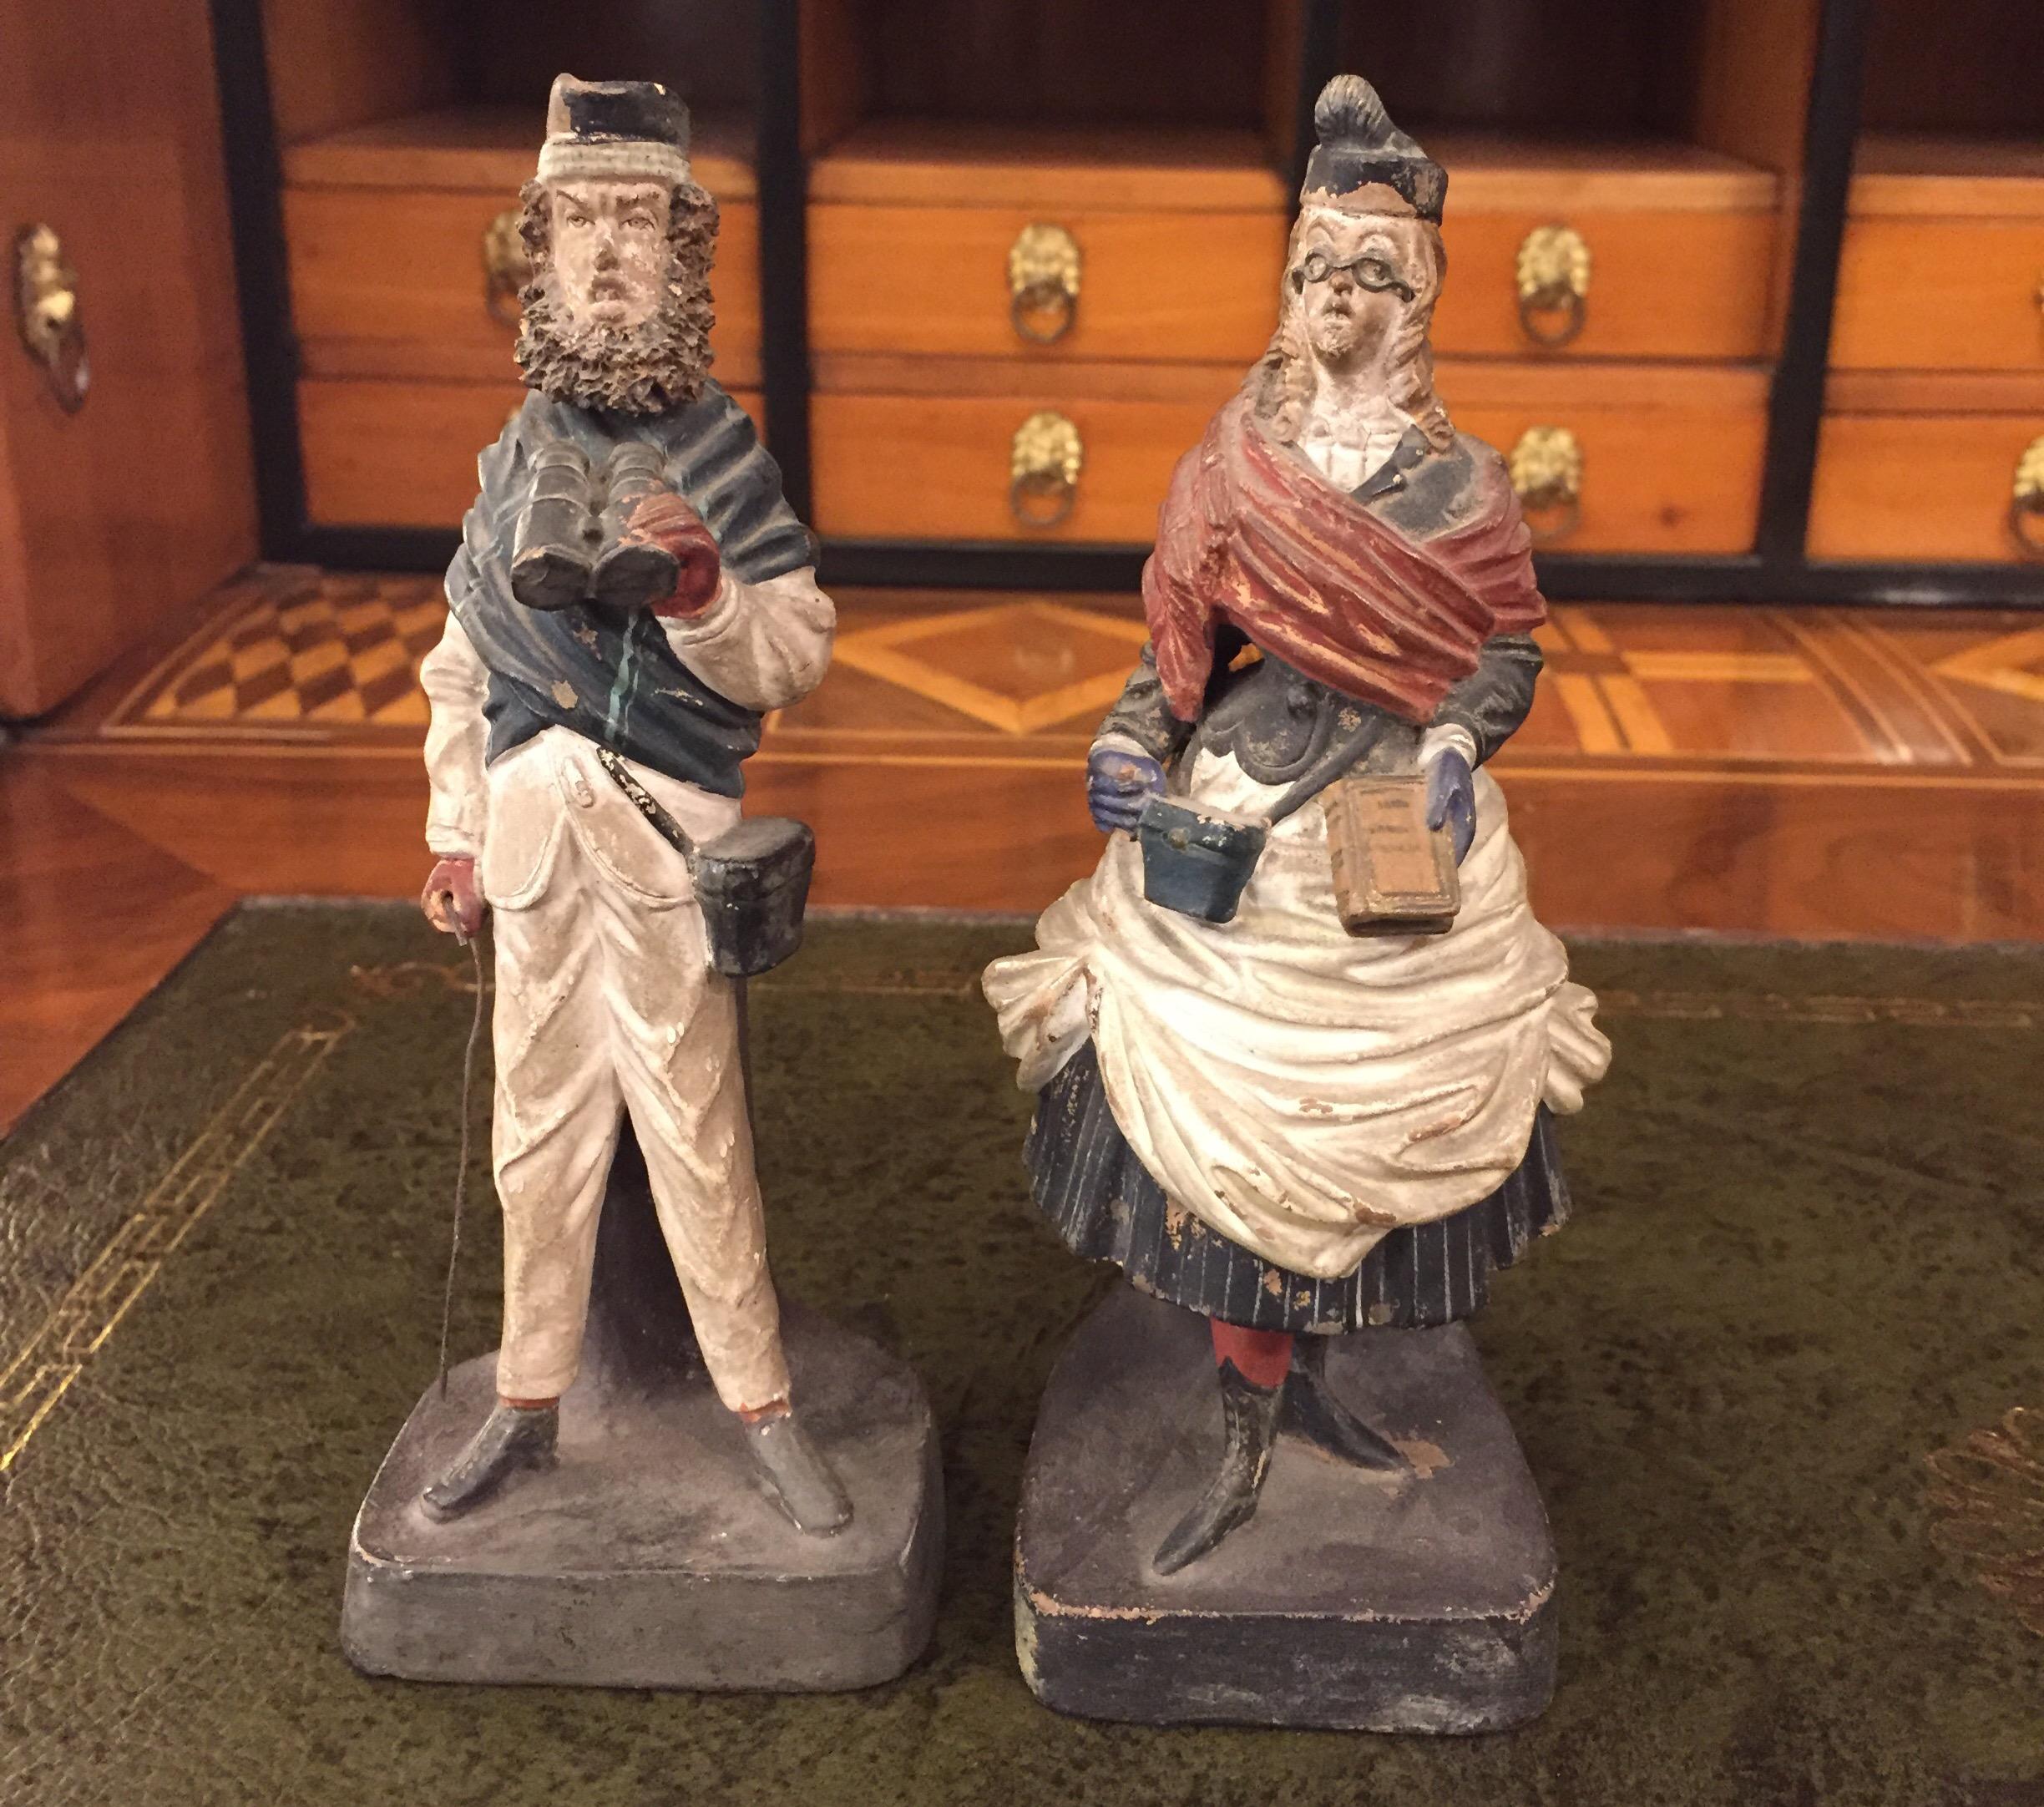 A set of two lovely Grand Tour hand-painted terracotta figurative pen-holders of Neapolitan origin, molded as a male and female foreign tourists caricatures, British characters.
Both polychrome painted earthenware figures are funny Italian desk